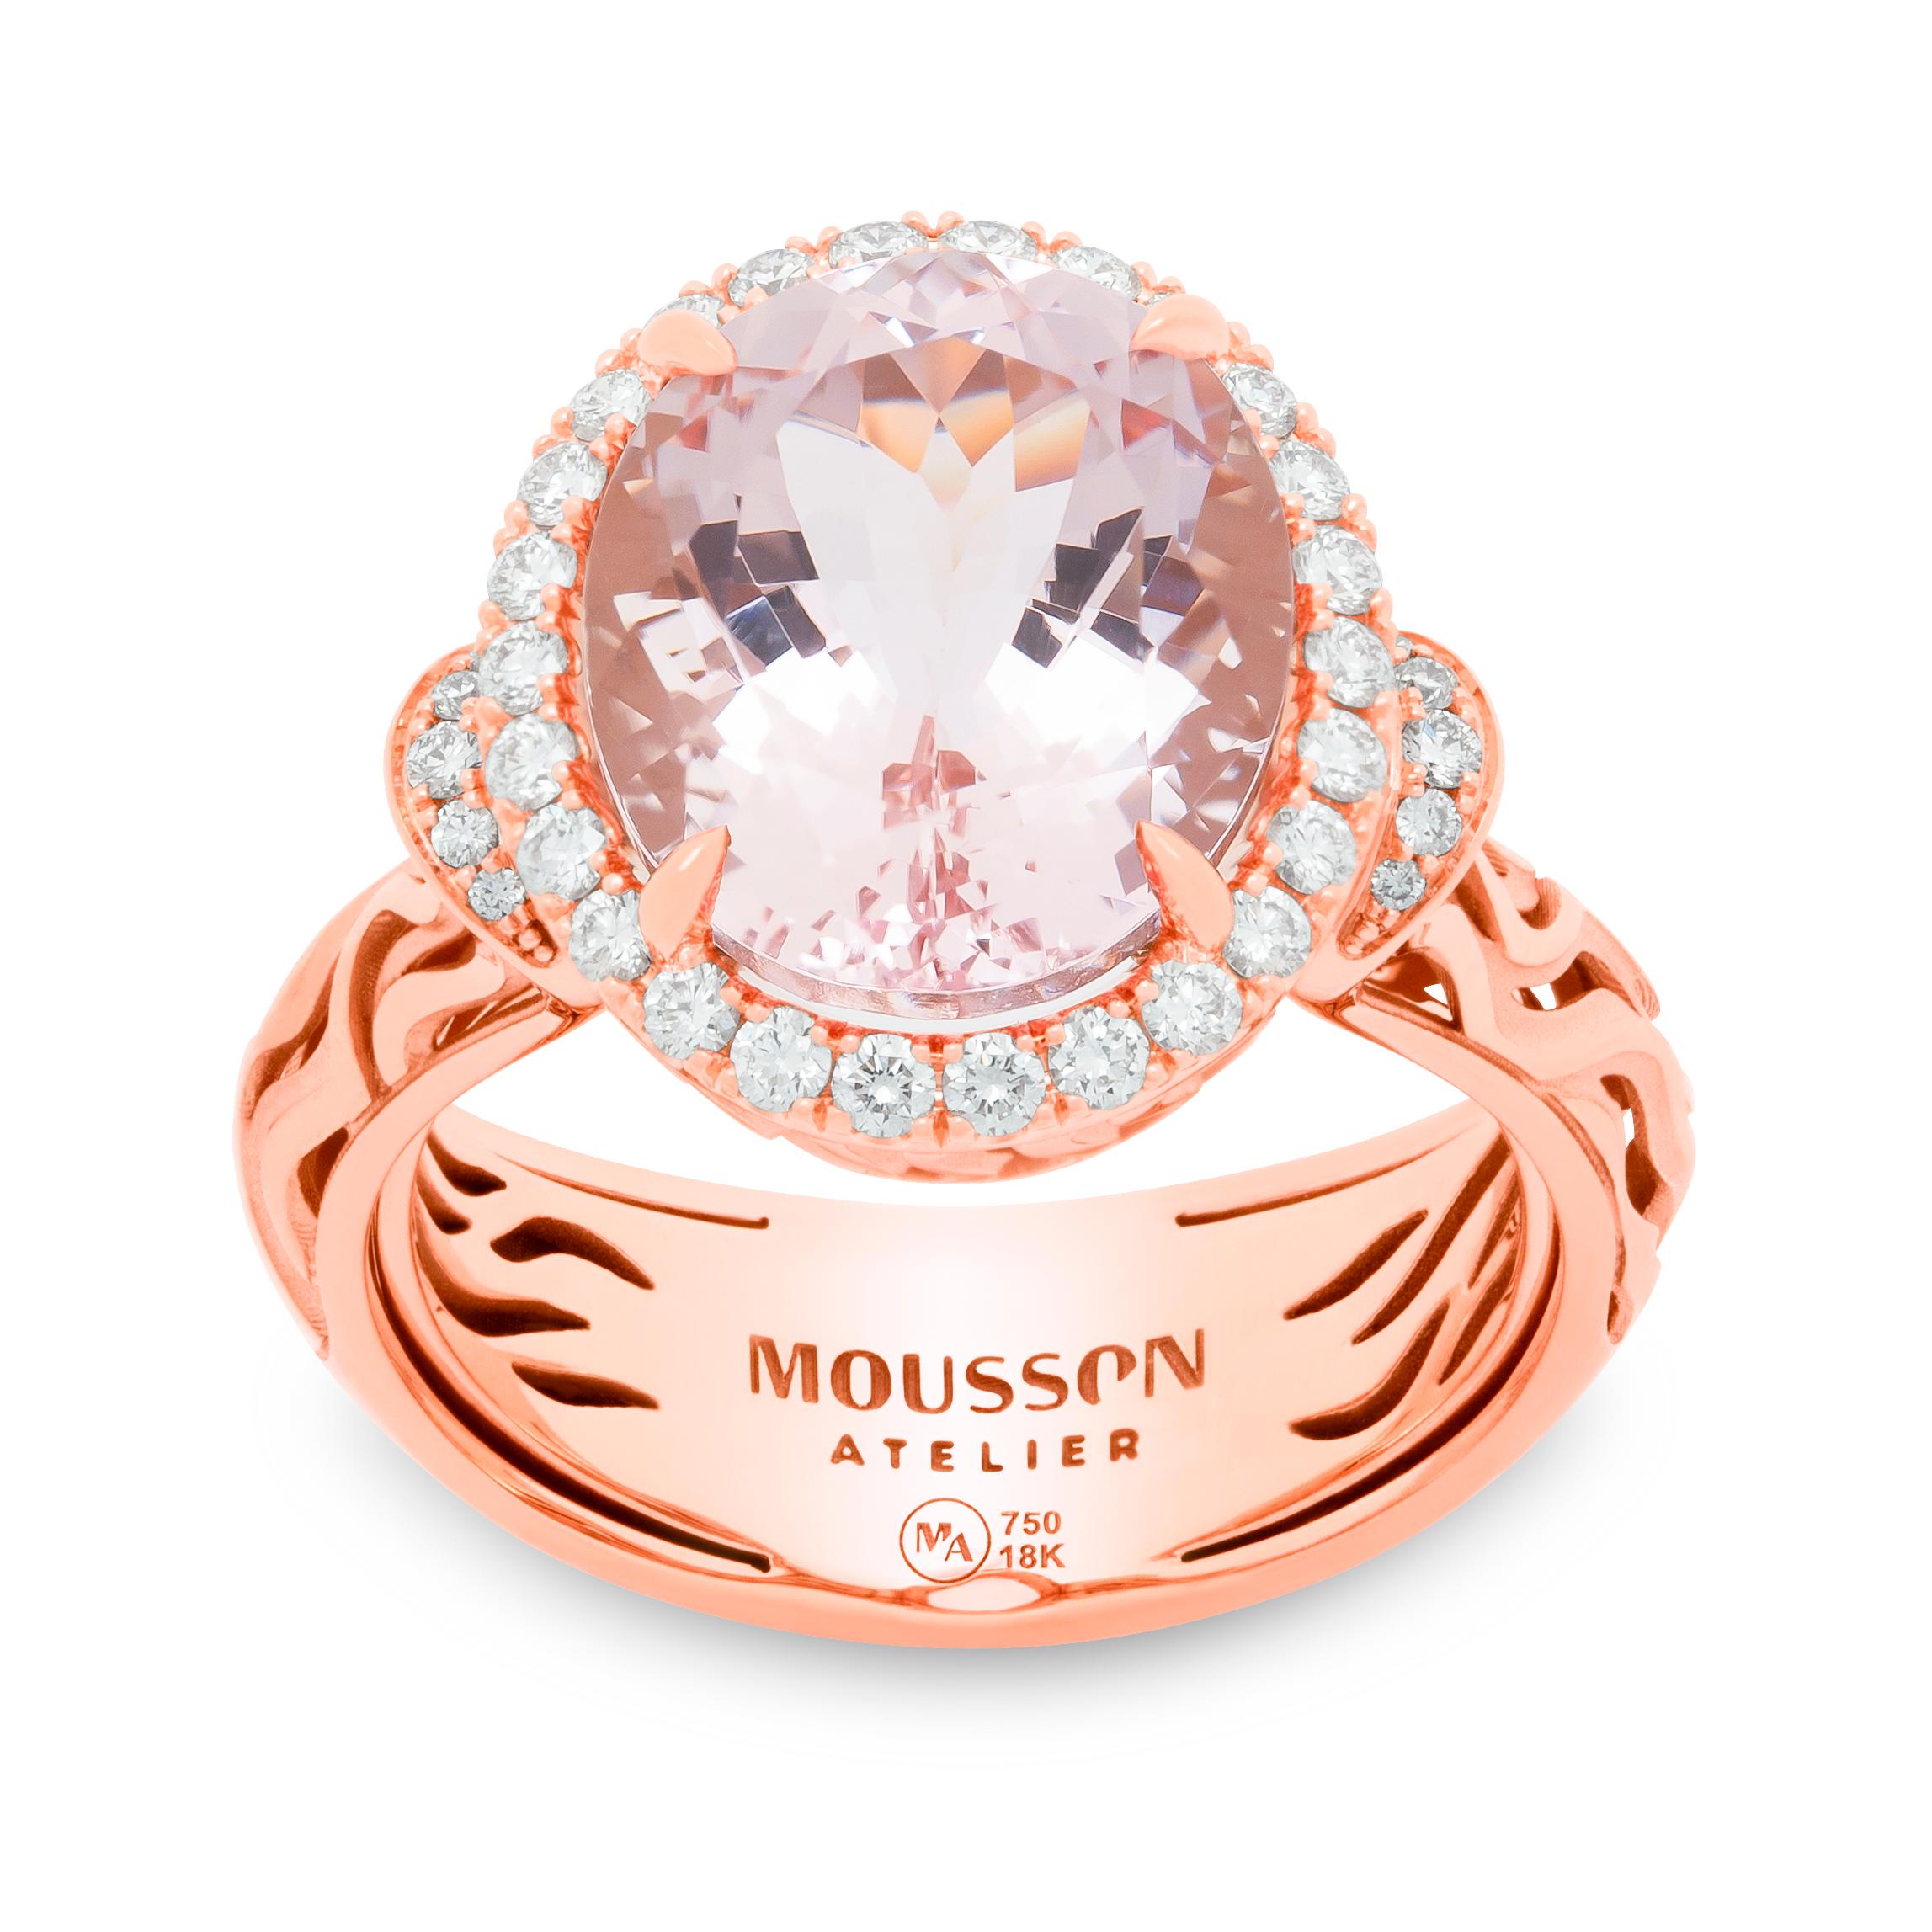 Morganite 5.13 Carat Diamonds 18 Karat Rose Gold New Classic Ring
We have published a series of new Rings with the same idea but with different details. Introducing a Ring crafted from 18 Karat Rose Gold, which in a trio with 5.13 Carat Morganite